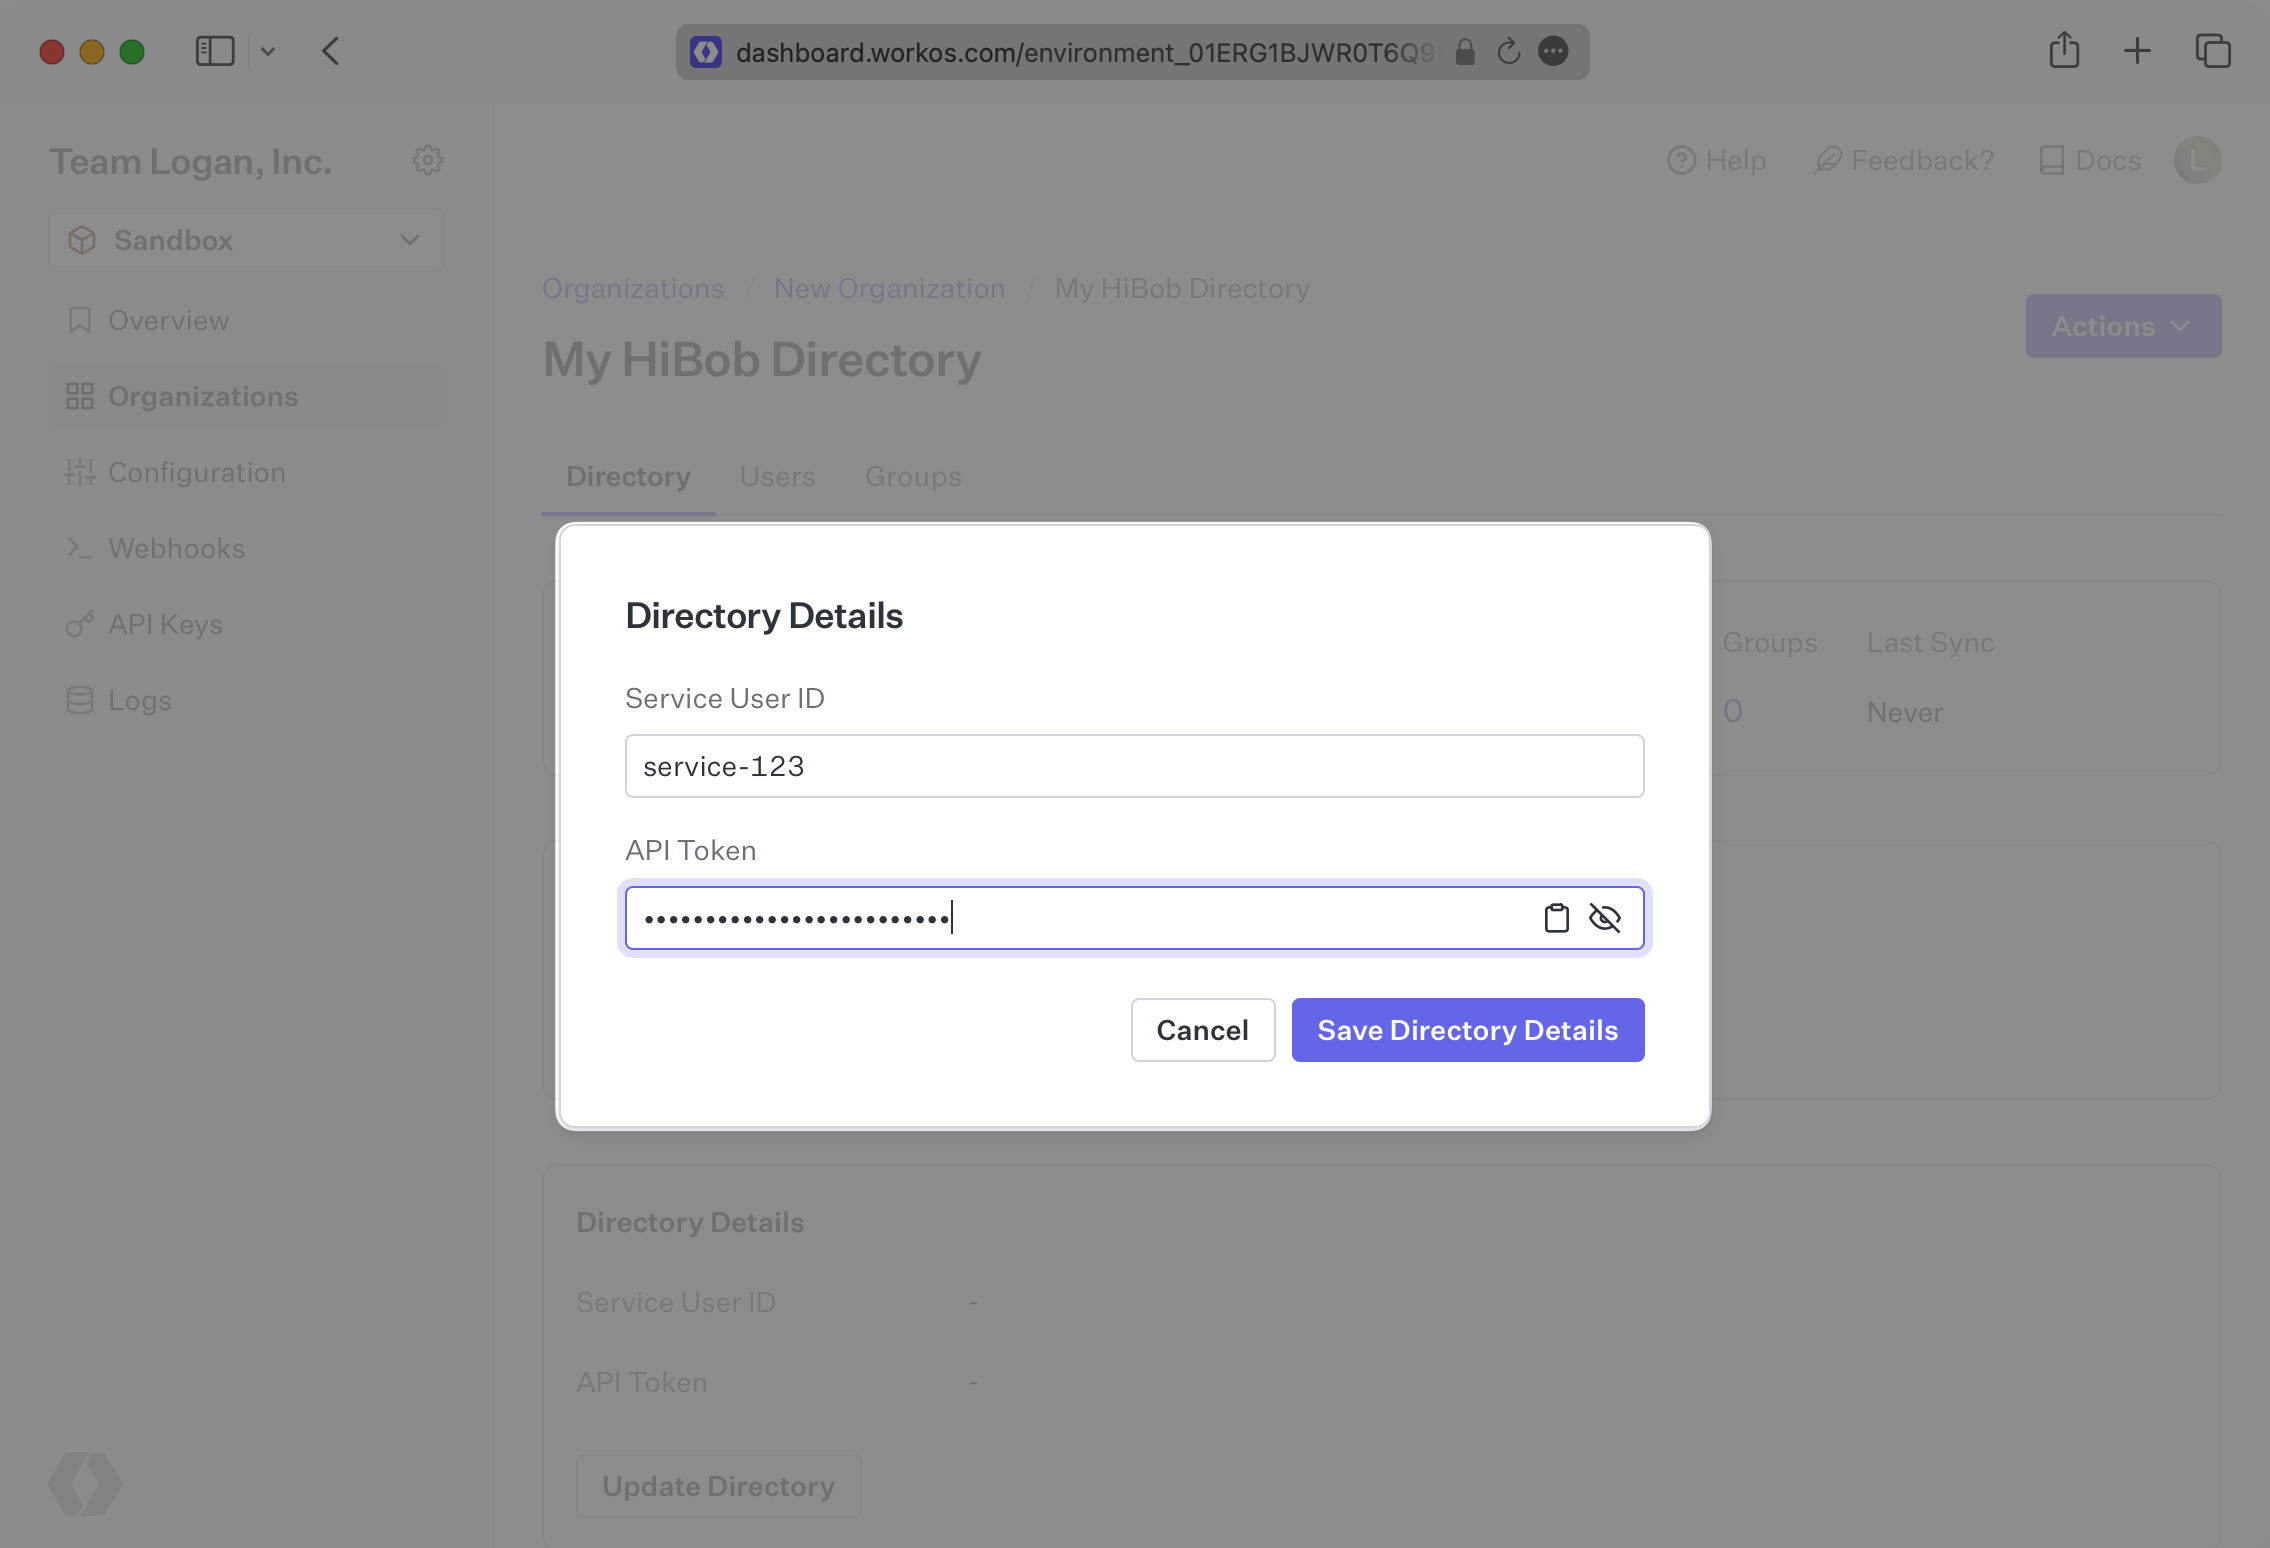 A screenshot highlighting the Directory Details modal of a HiBob directory in the WorkOS Dashboard.